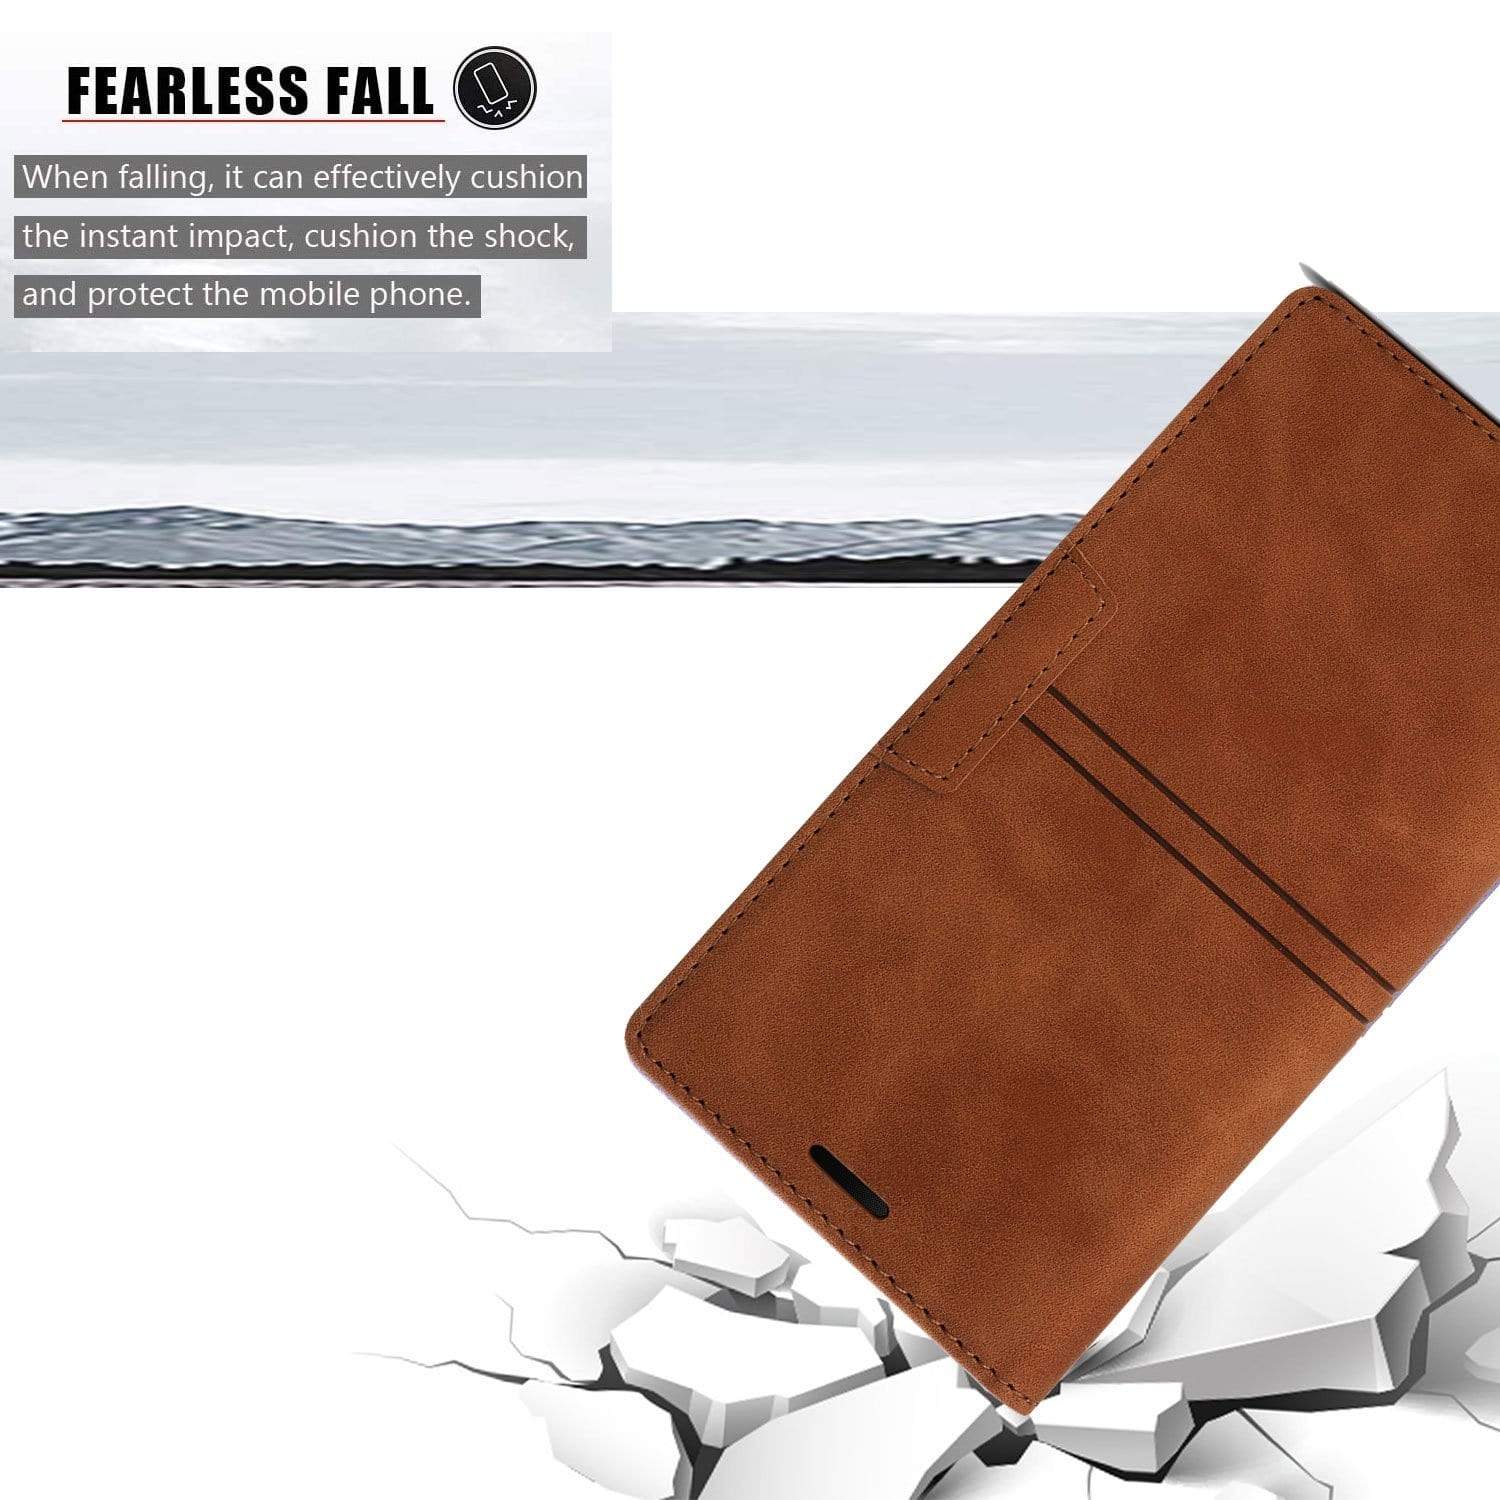 Flip Leather Samsung Galaxy Wallet Cases Styleeo